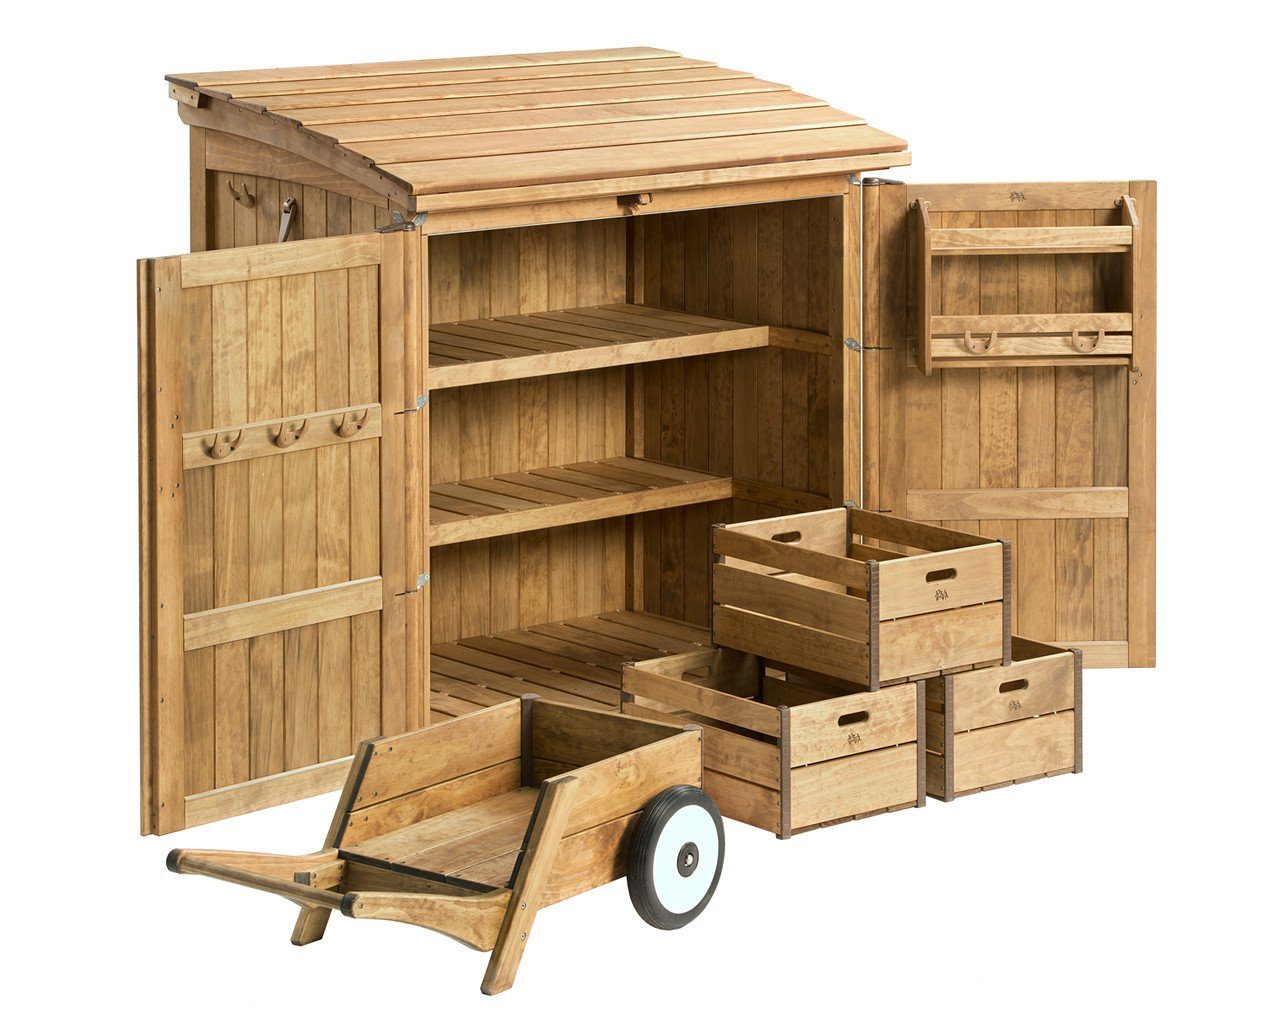 Shed and Storage Set by Community Playthings - louisekool